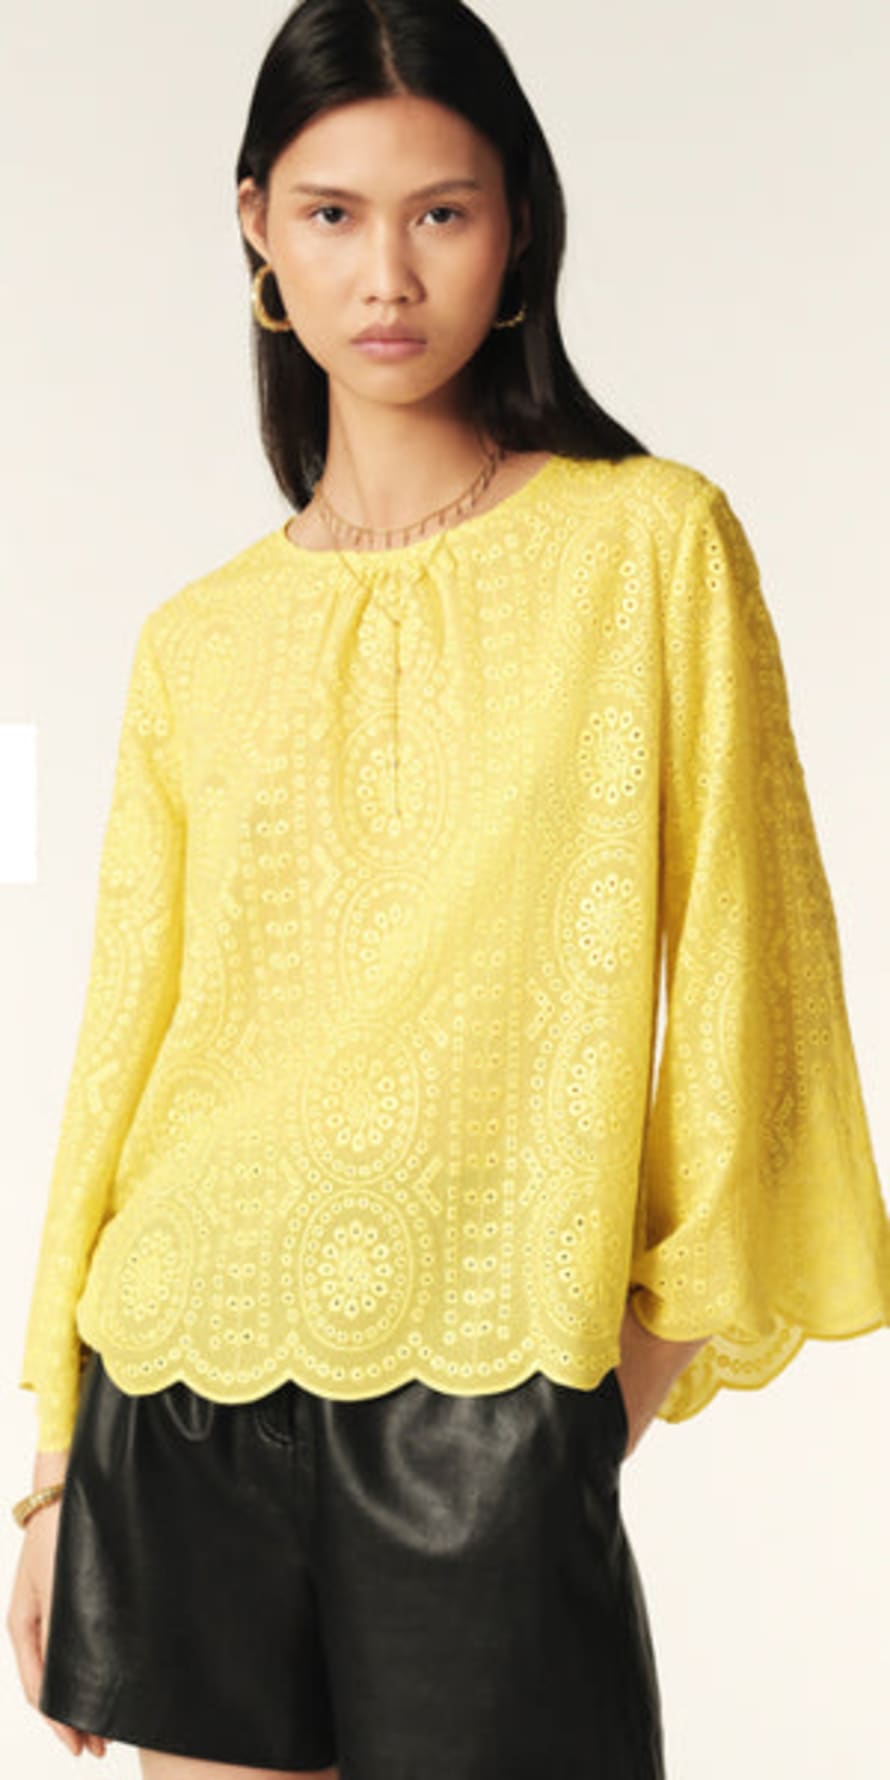 BA&SH Bruna Broderie Anglaise Blouse - Yellow